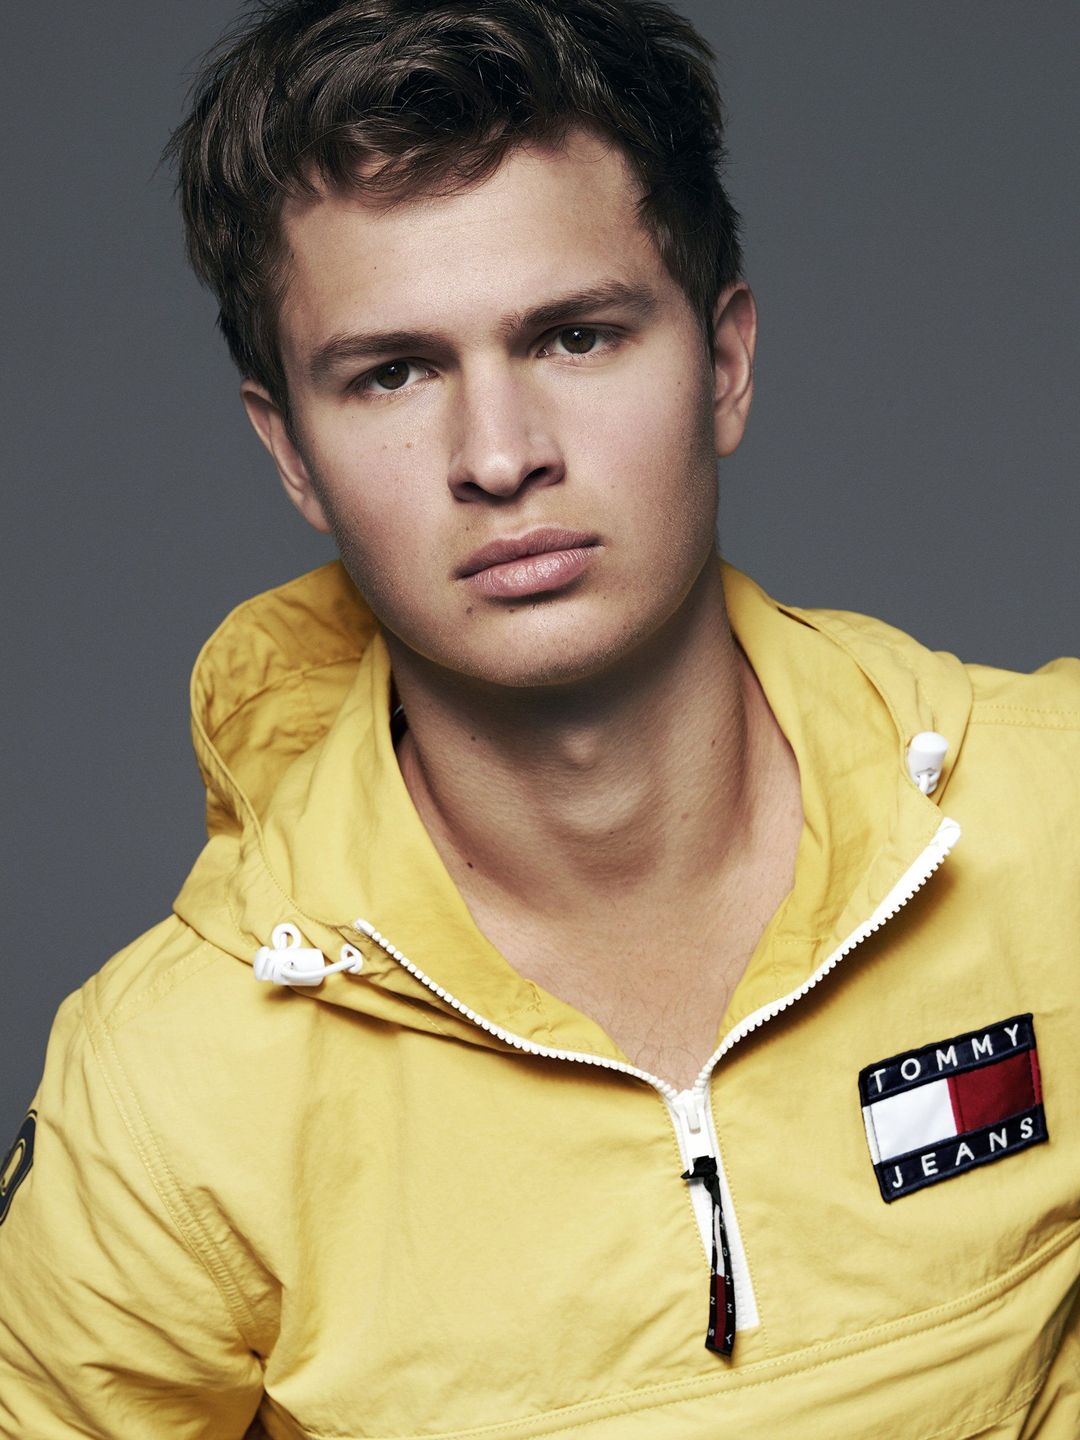 Ansel Elgort who is his mother